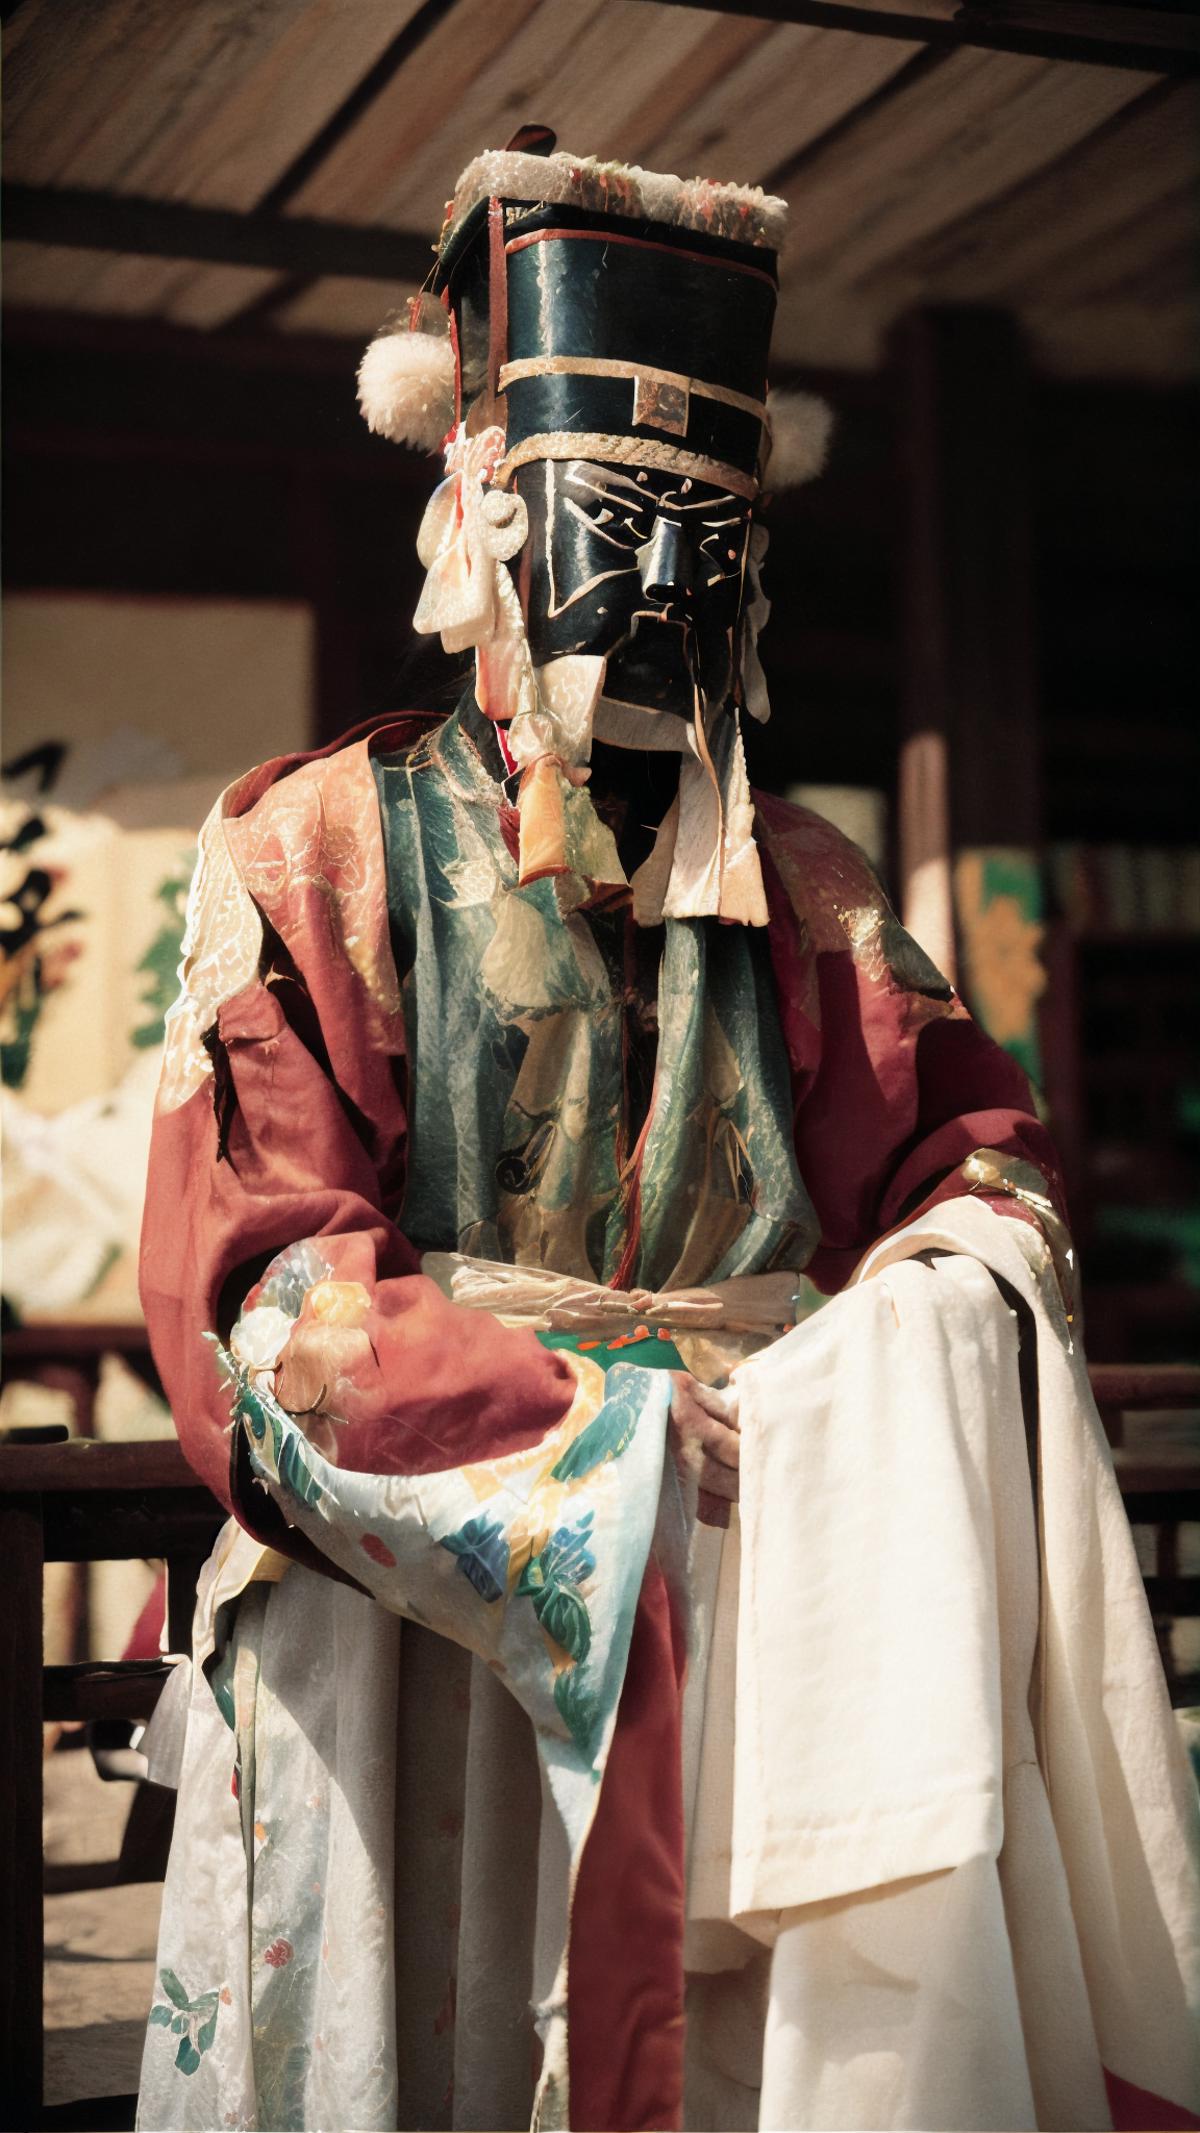 Nuo Opera - Chinese Horror Aesthetics/Chinese Intangible Cultural Heritage || 傩戏-中式恐怖美学/中国非物质文化遗产 image by Gostar